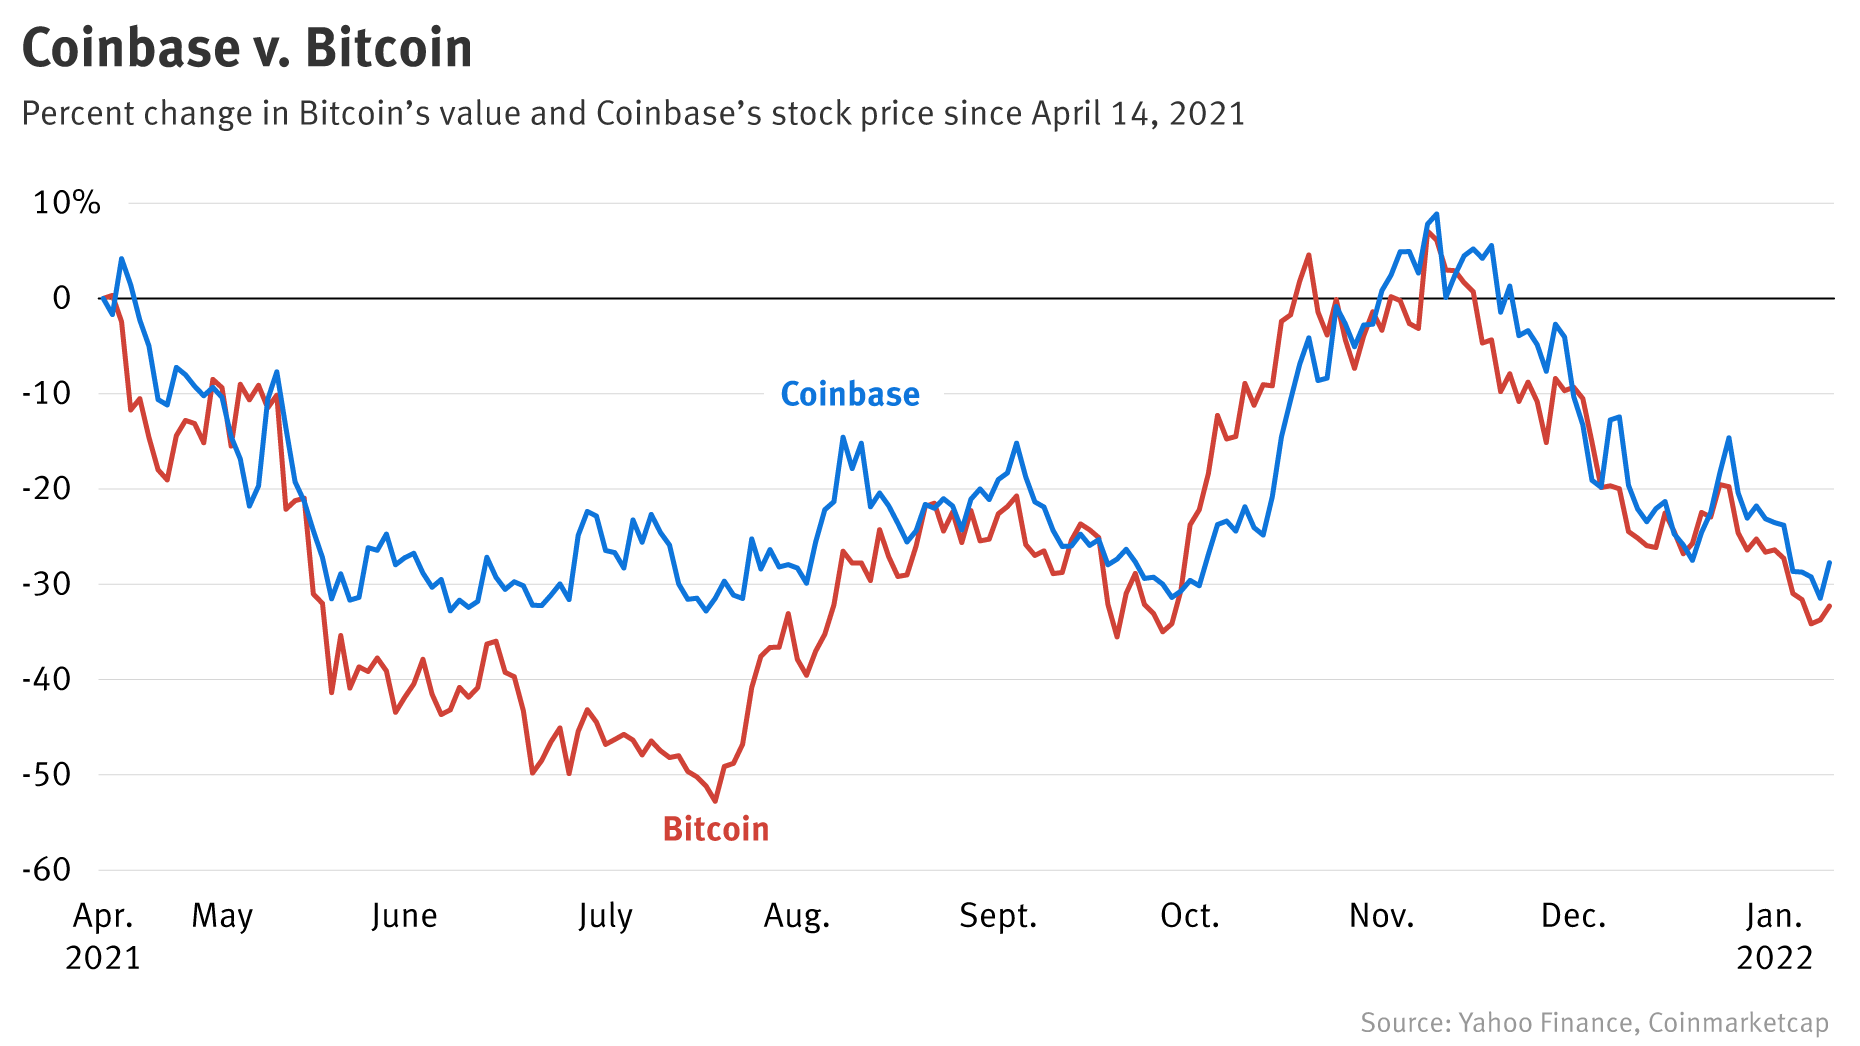 why is coinbase price higher